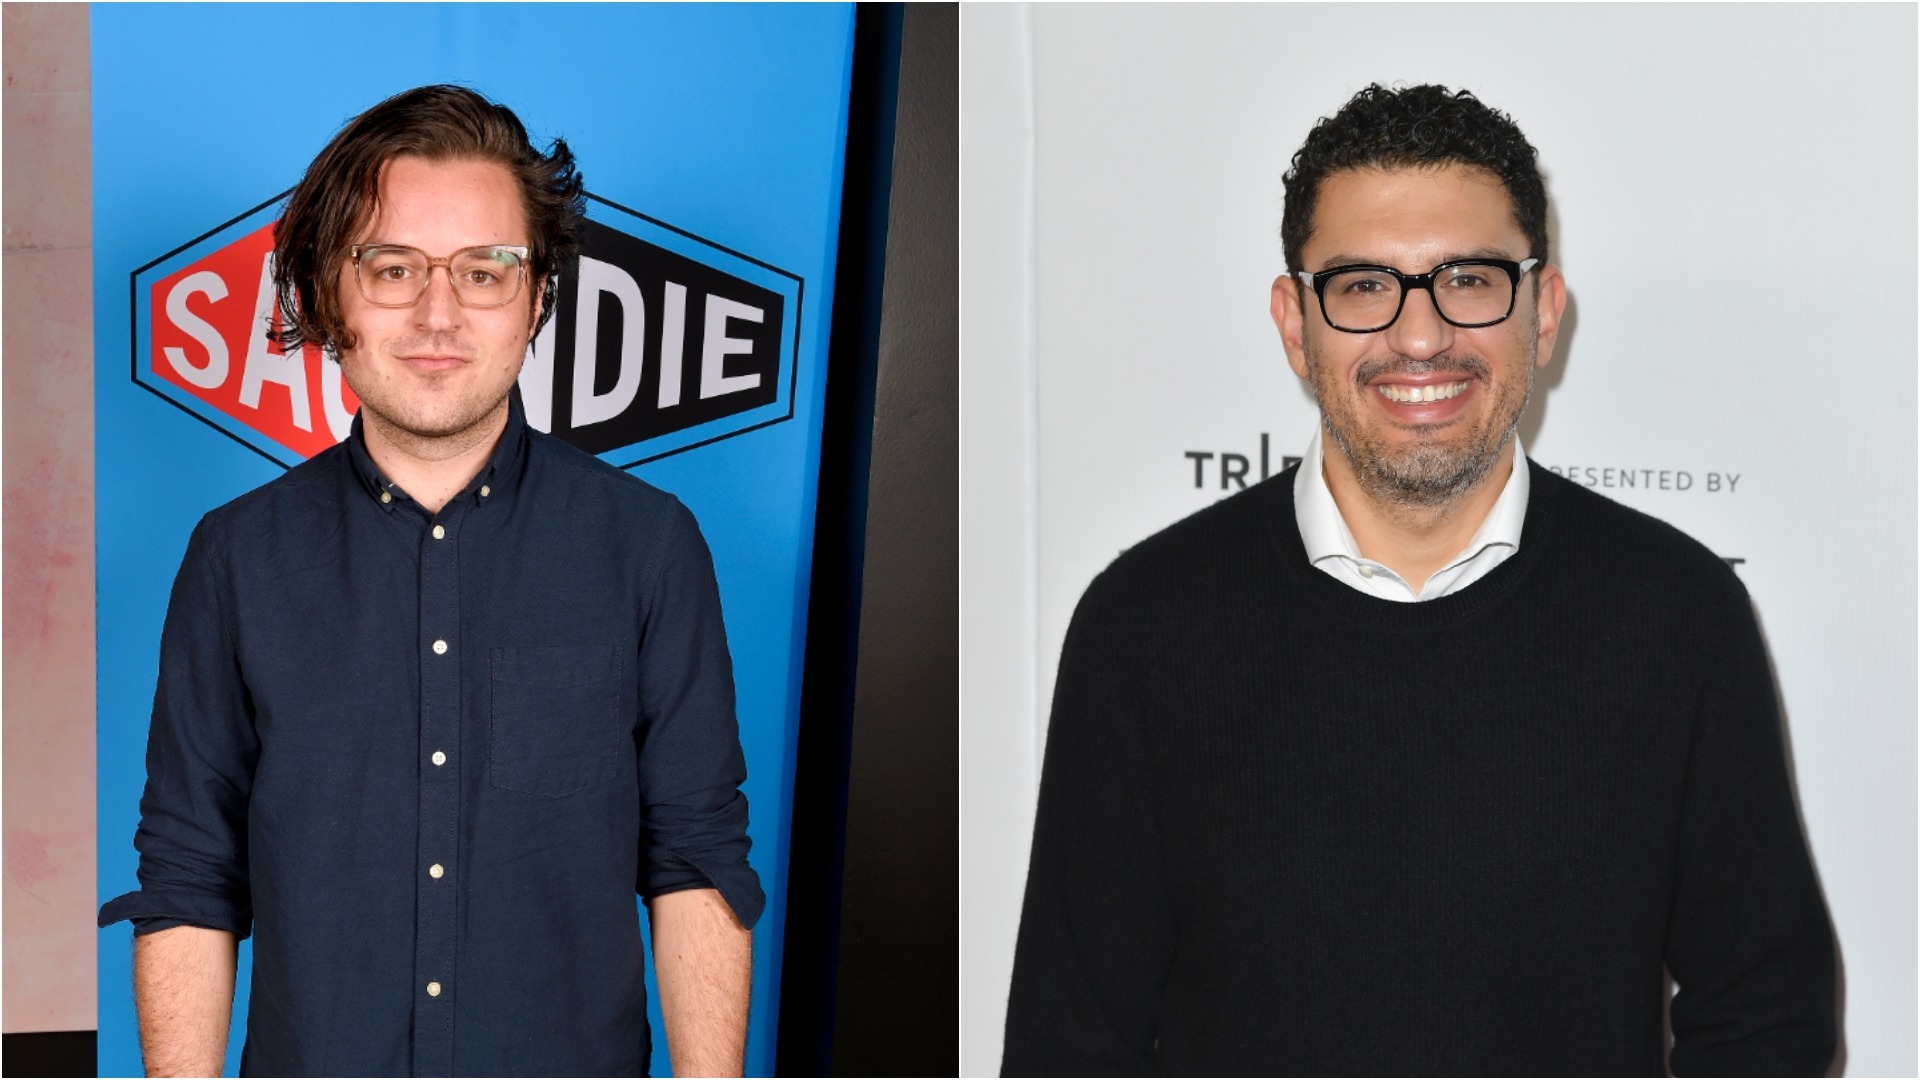 Dark comedy series The Resort from Palm Springs writer heads to Peacock, Sam Esmail to produce